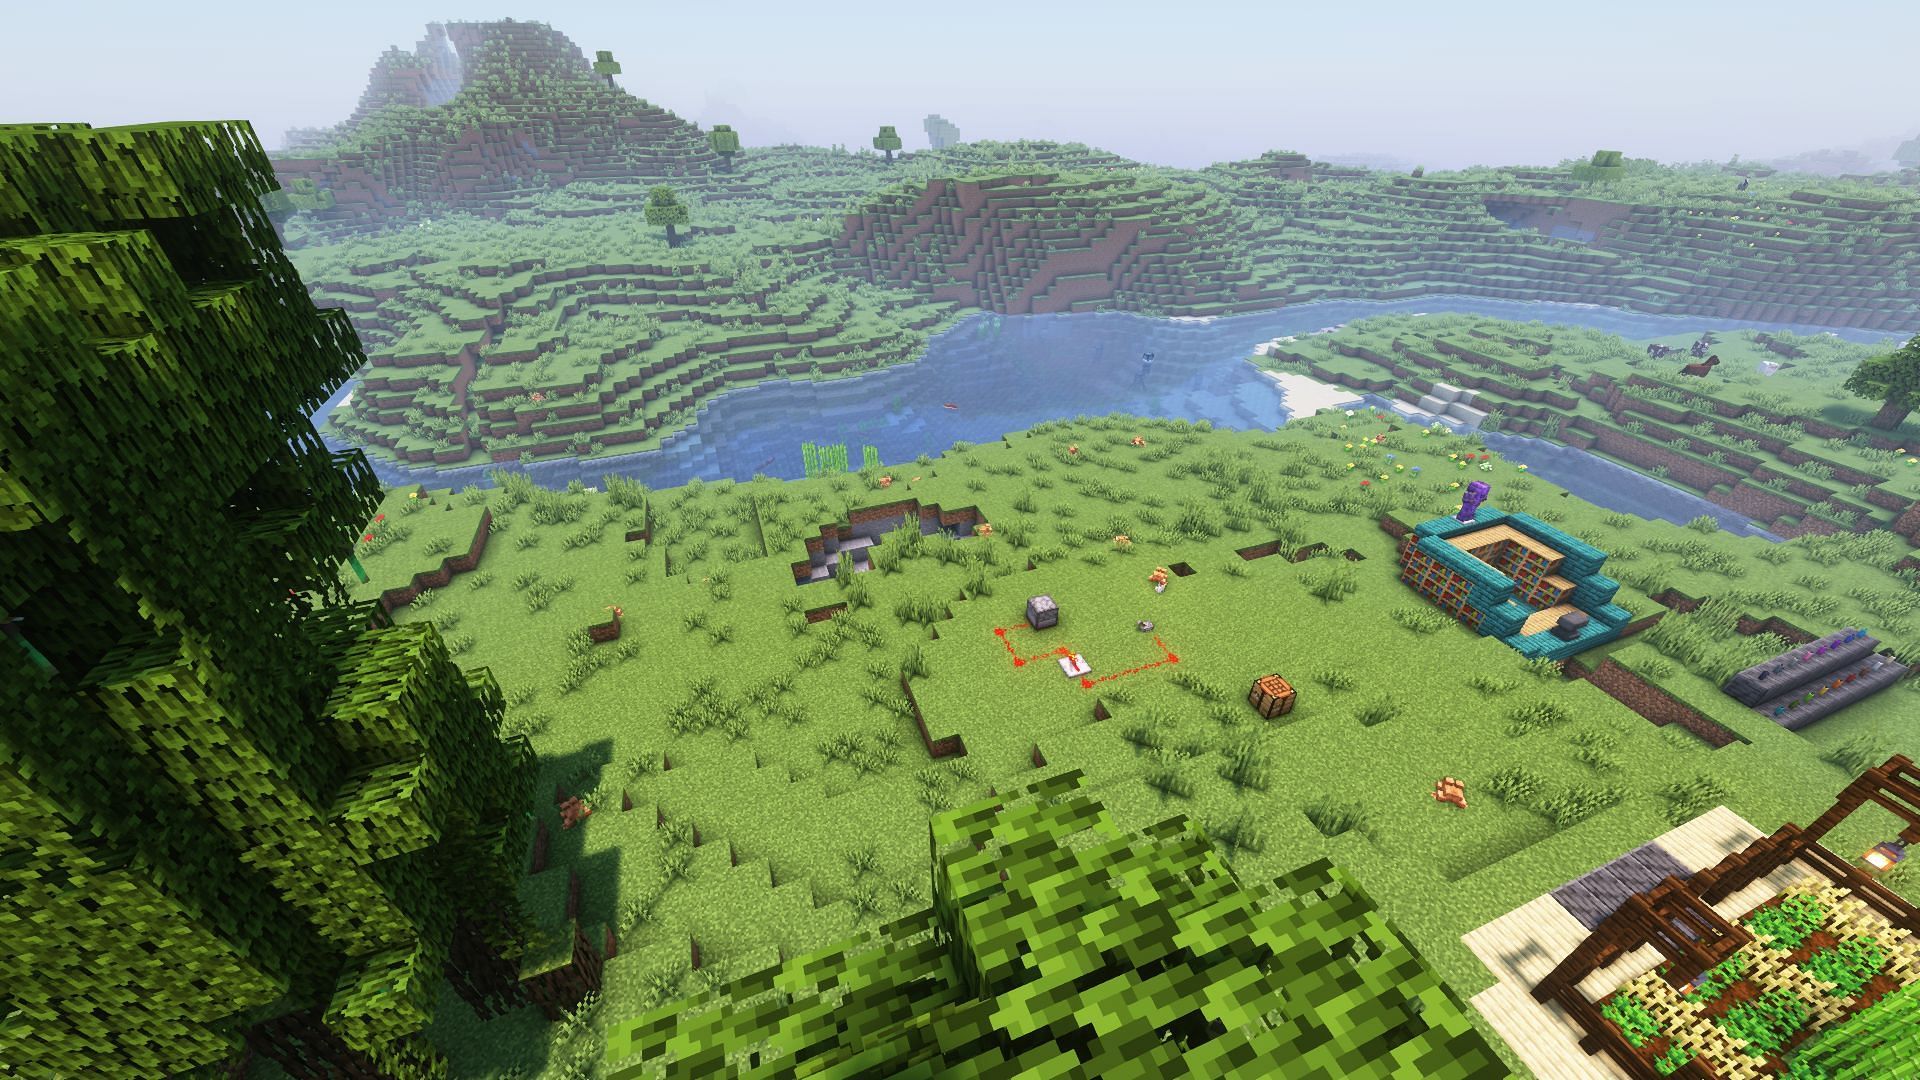 The test area with the Complimentary Reimagined Shader (Image via Minecraft)